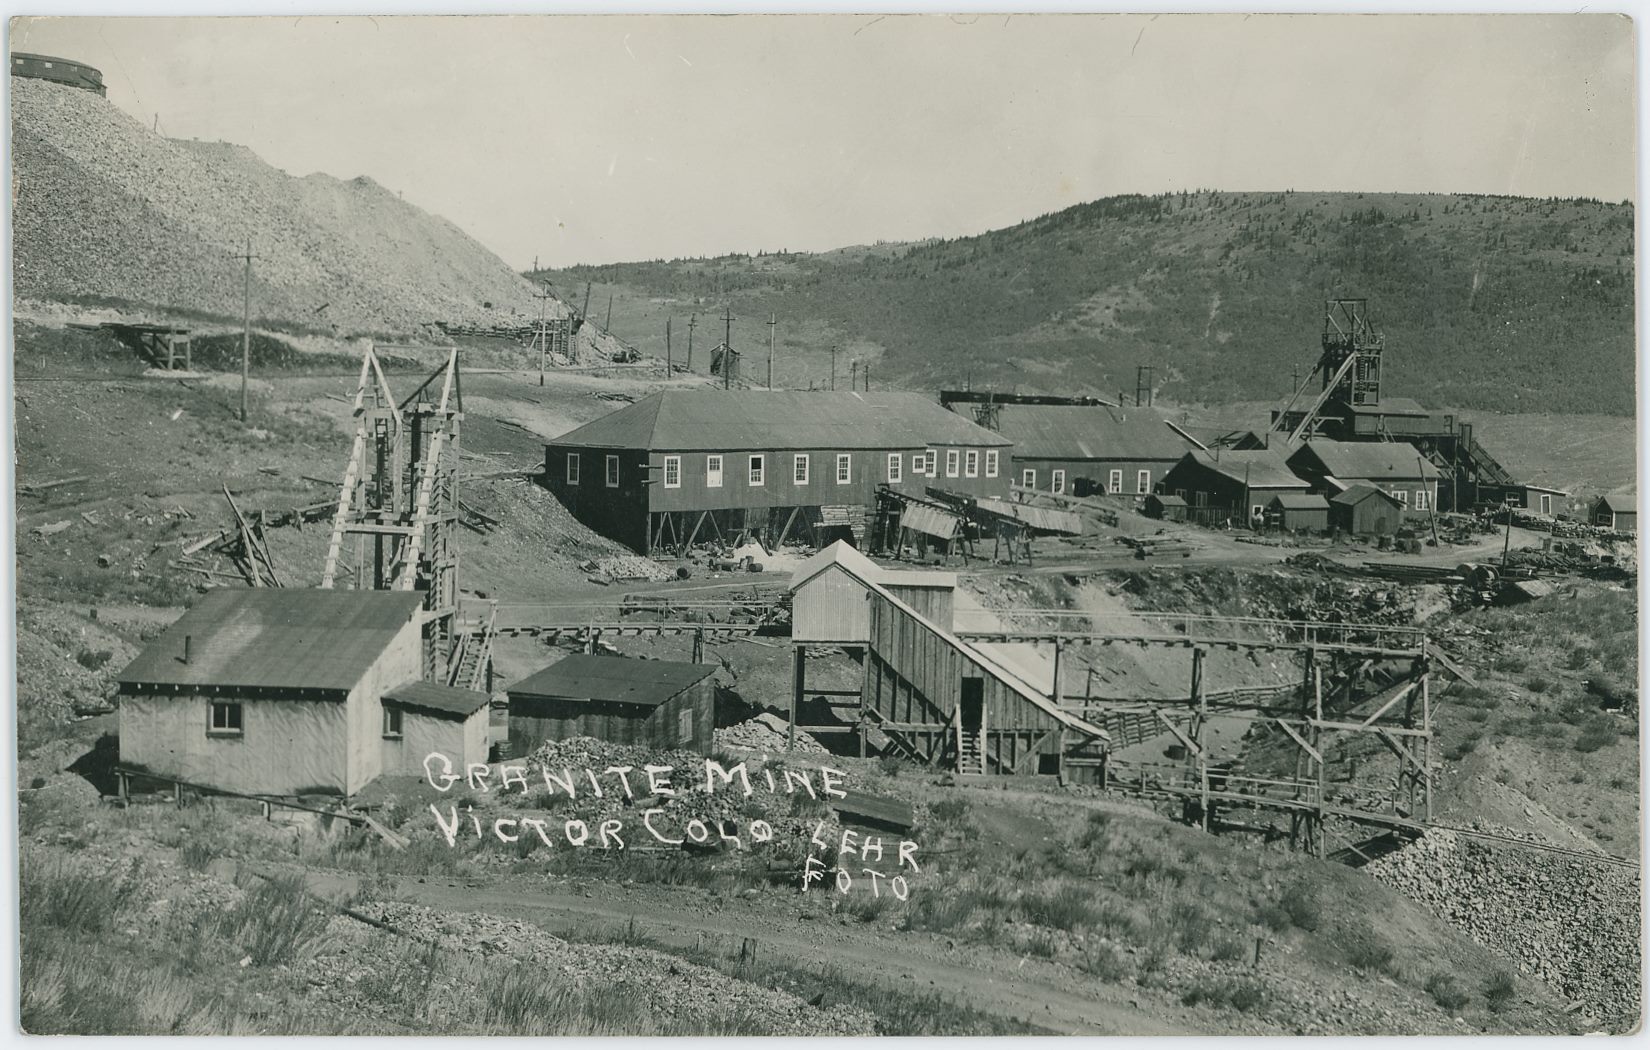 Scene shows the smaller more 'modern' Granite Mine as it was looking at the time of the photo, with the dumps of the Portland No. 2 in upper left and the Lumber Work House of the Portland No. 1 seen about 1/3 down from top and center sideways, while the Head-Frame is seen near right-hand side. The old grade of the Golden Circle ran in the 'cut' seen in lower right quadrangle – having come out from the Steel Tunnel below the Portland No. 1 dumps, part of the crib-walls is still seen in this view.
   There appears to still be track on the Short Line Ajax branch as well, seen below the Portland No. 2 dumps in upper left, track is seen about 1/3 down from top, from left-hand edge to about 2/5 into the view towards right, where it curves out of out view.